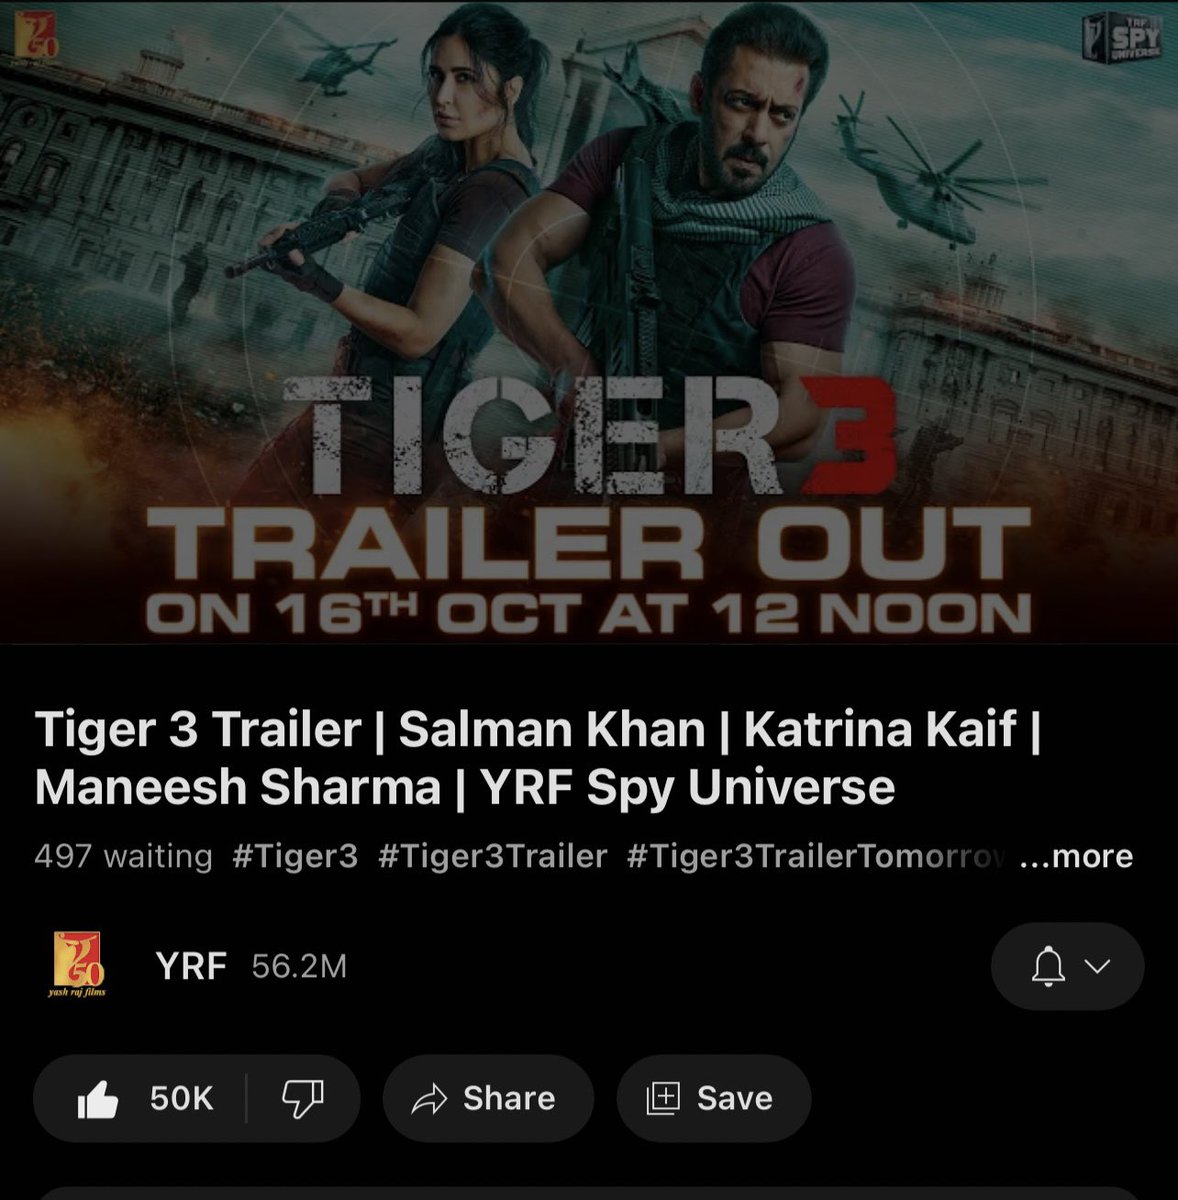 The excitement is off the charts! 

#Tiger3Trailer has already soared past 50K likes on YouTube, a full 15 hours before the premiere.

The hype is undeniably real! 🎥🔥👏 #SalmanKhan #BlockbusterAlert

TIGER3 KA TRAILER KAL